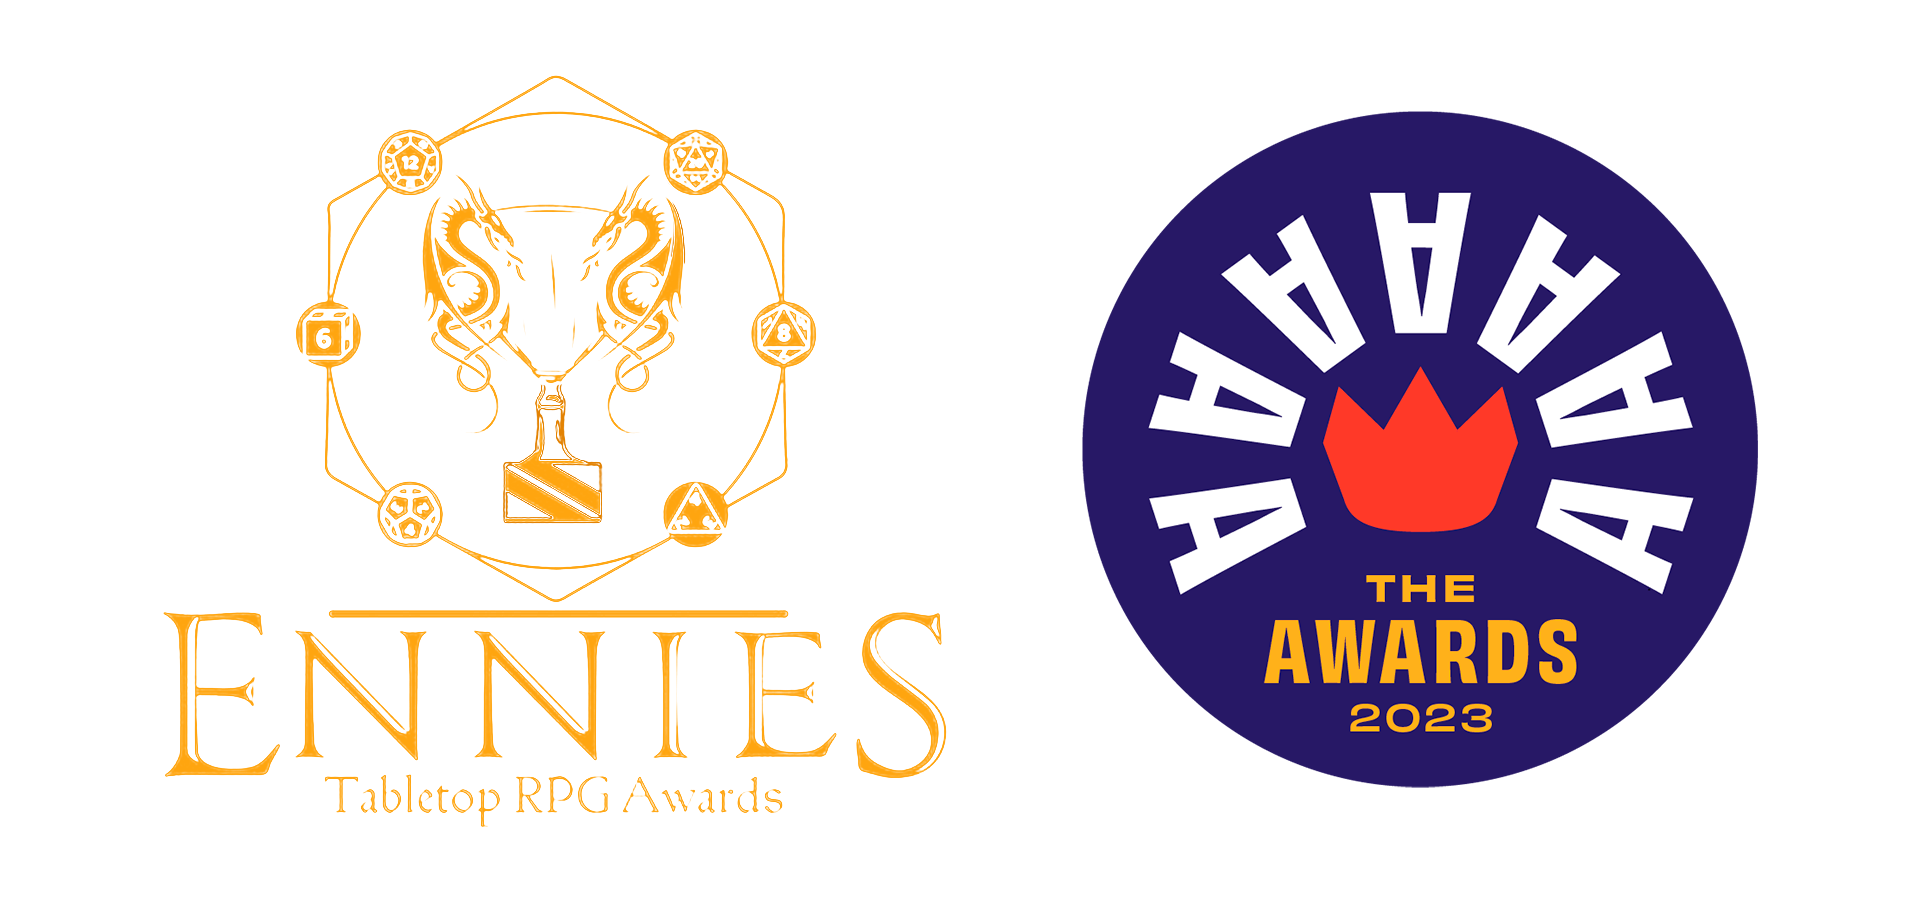 Logos for the ENNIES Tabletop RPG Awards and The Awards